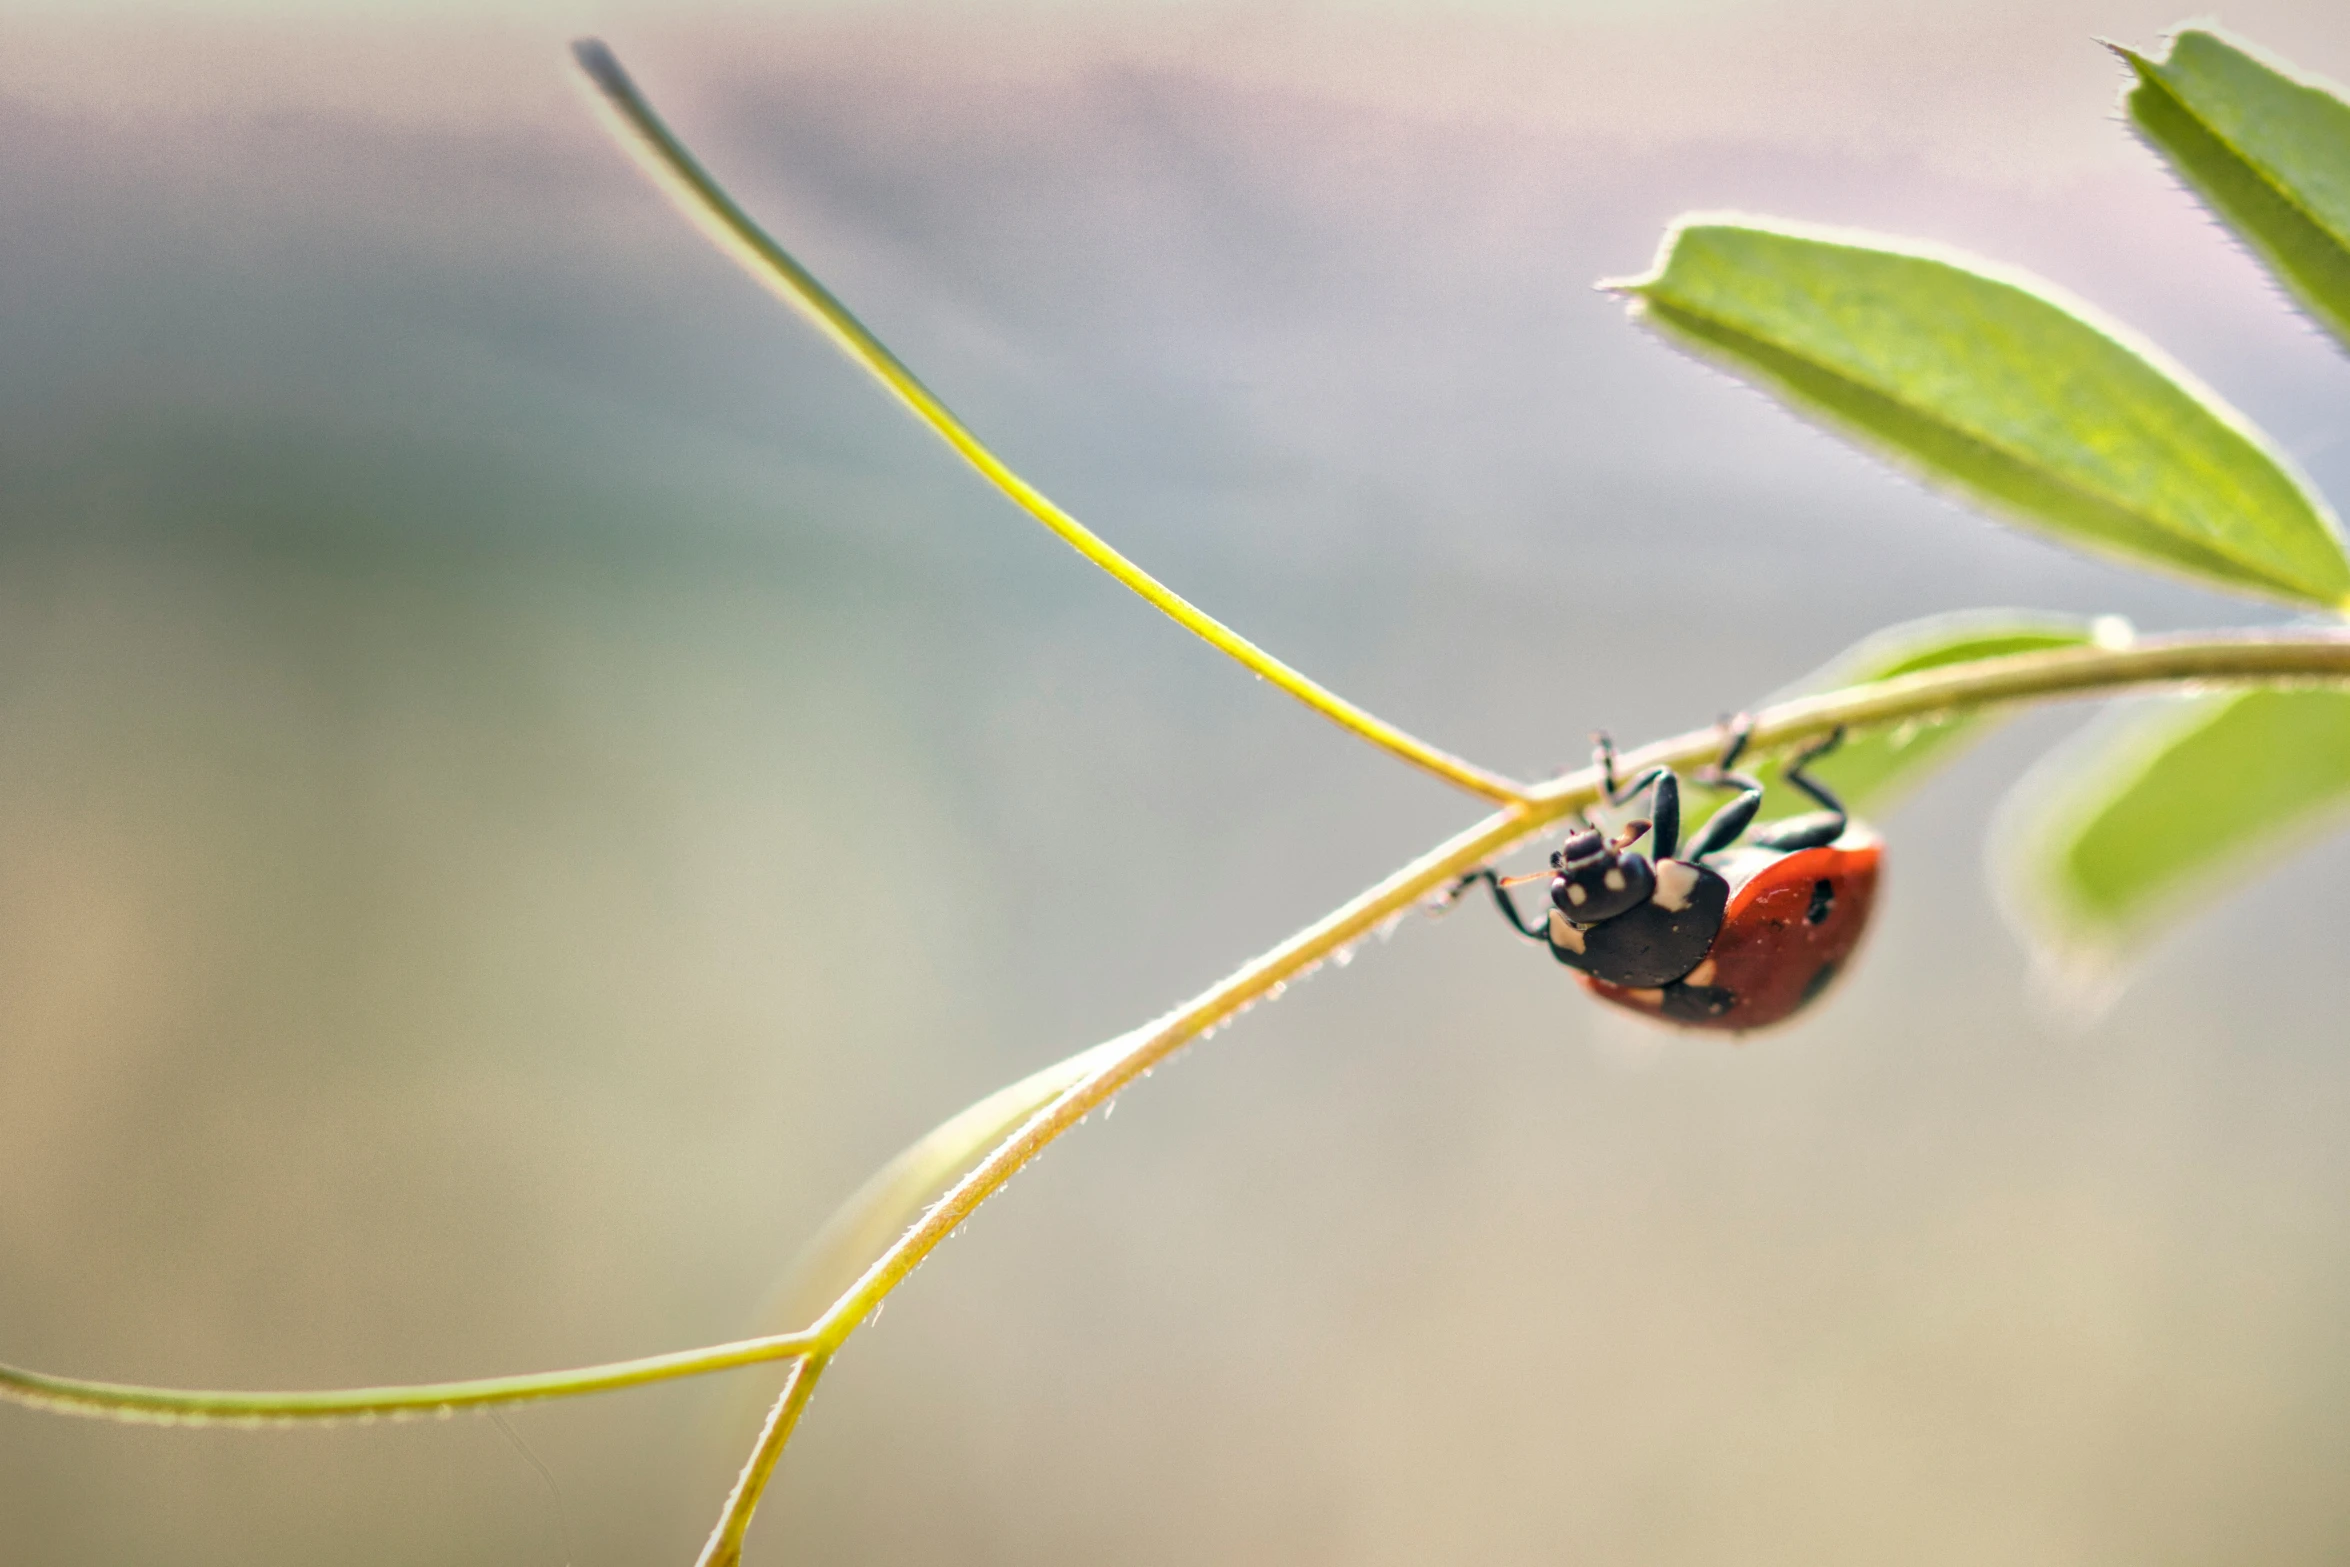 a close up of a lady bug on a twig